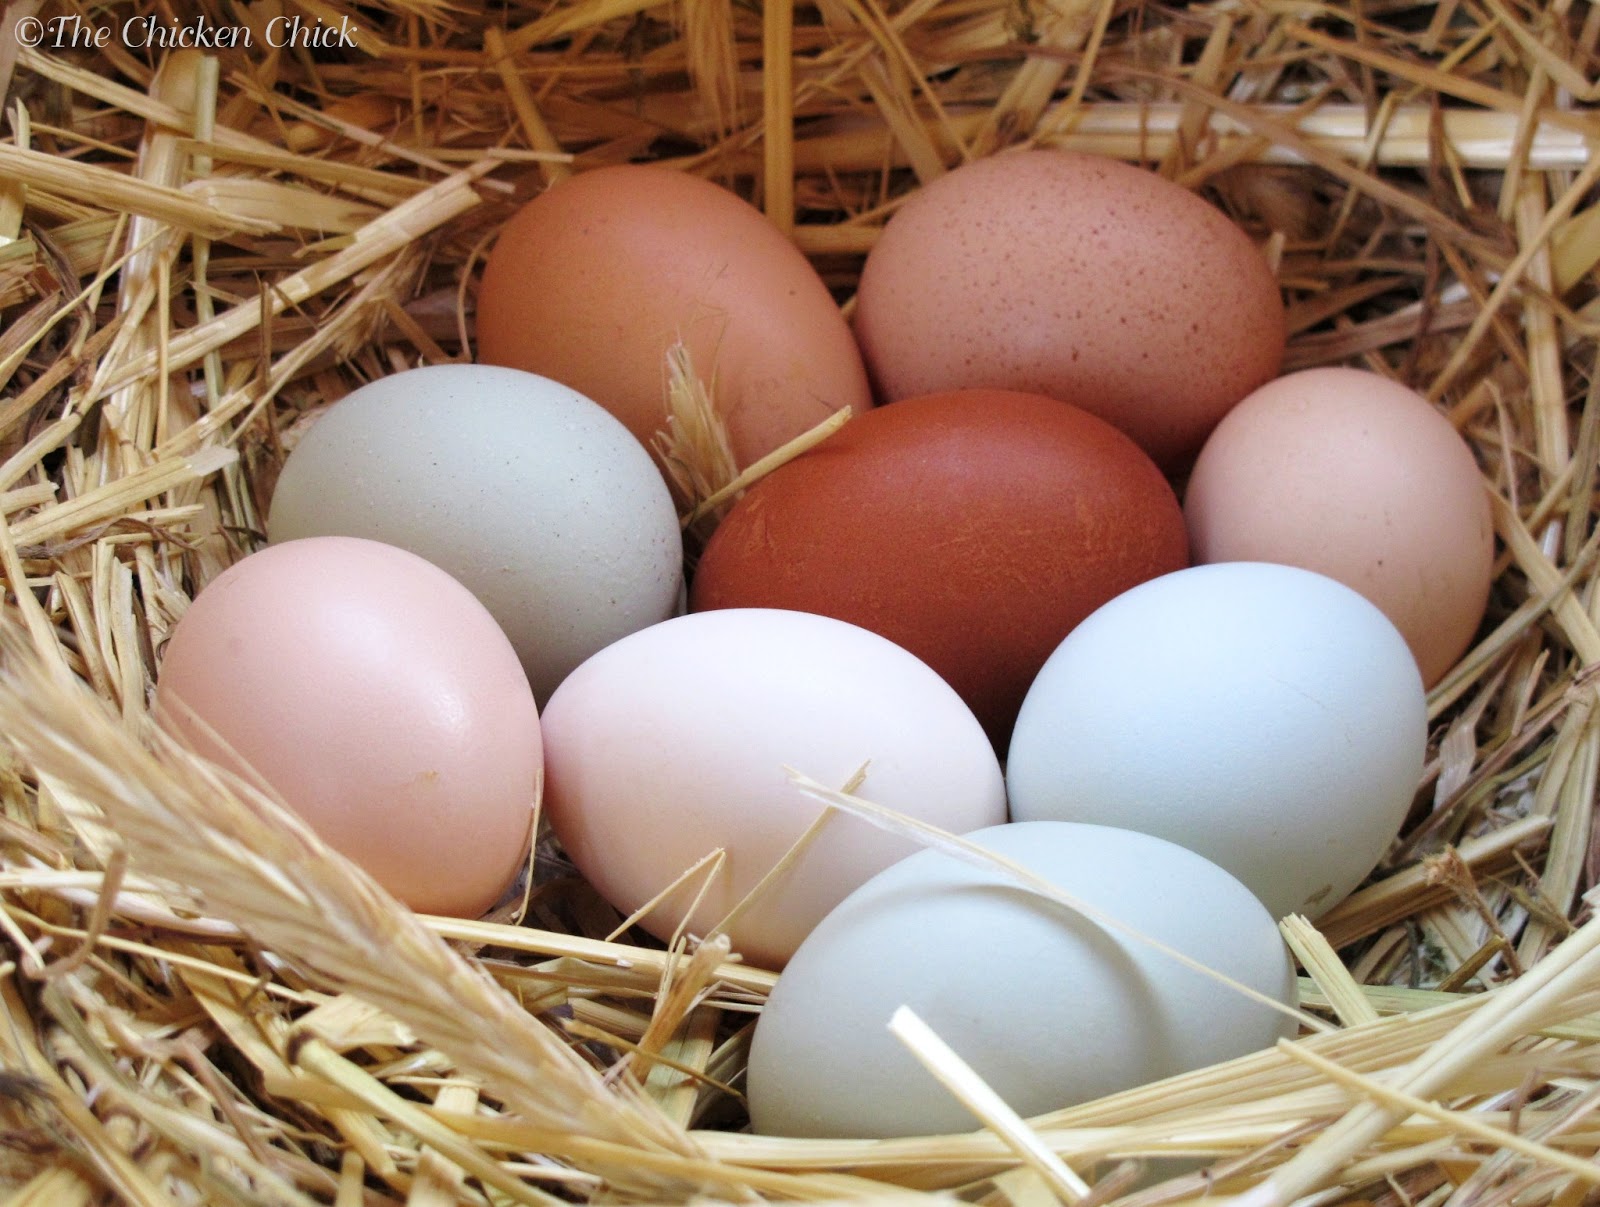 Cool Egg Facts & Video of Hen Laying an Egg! | Community Chickens